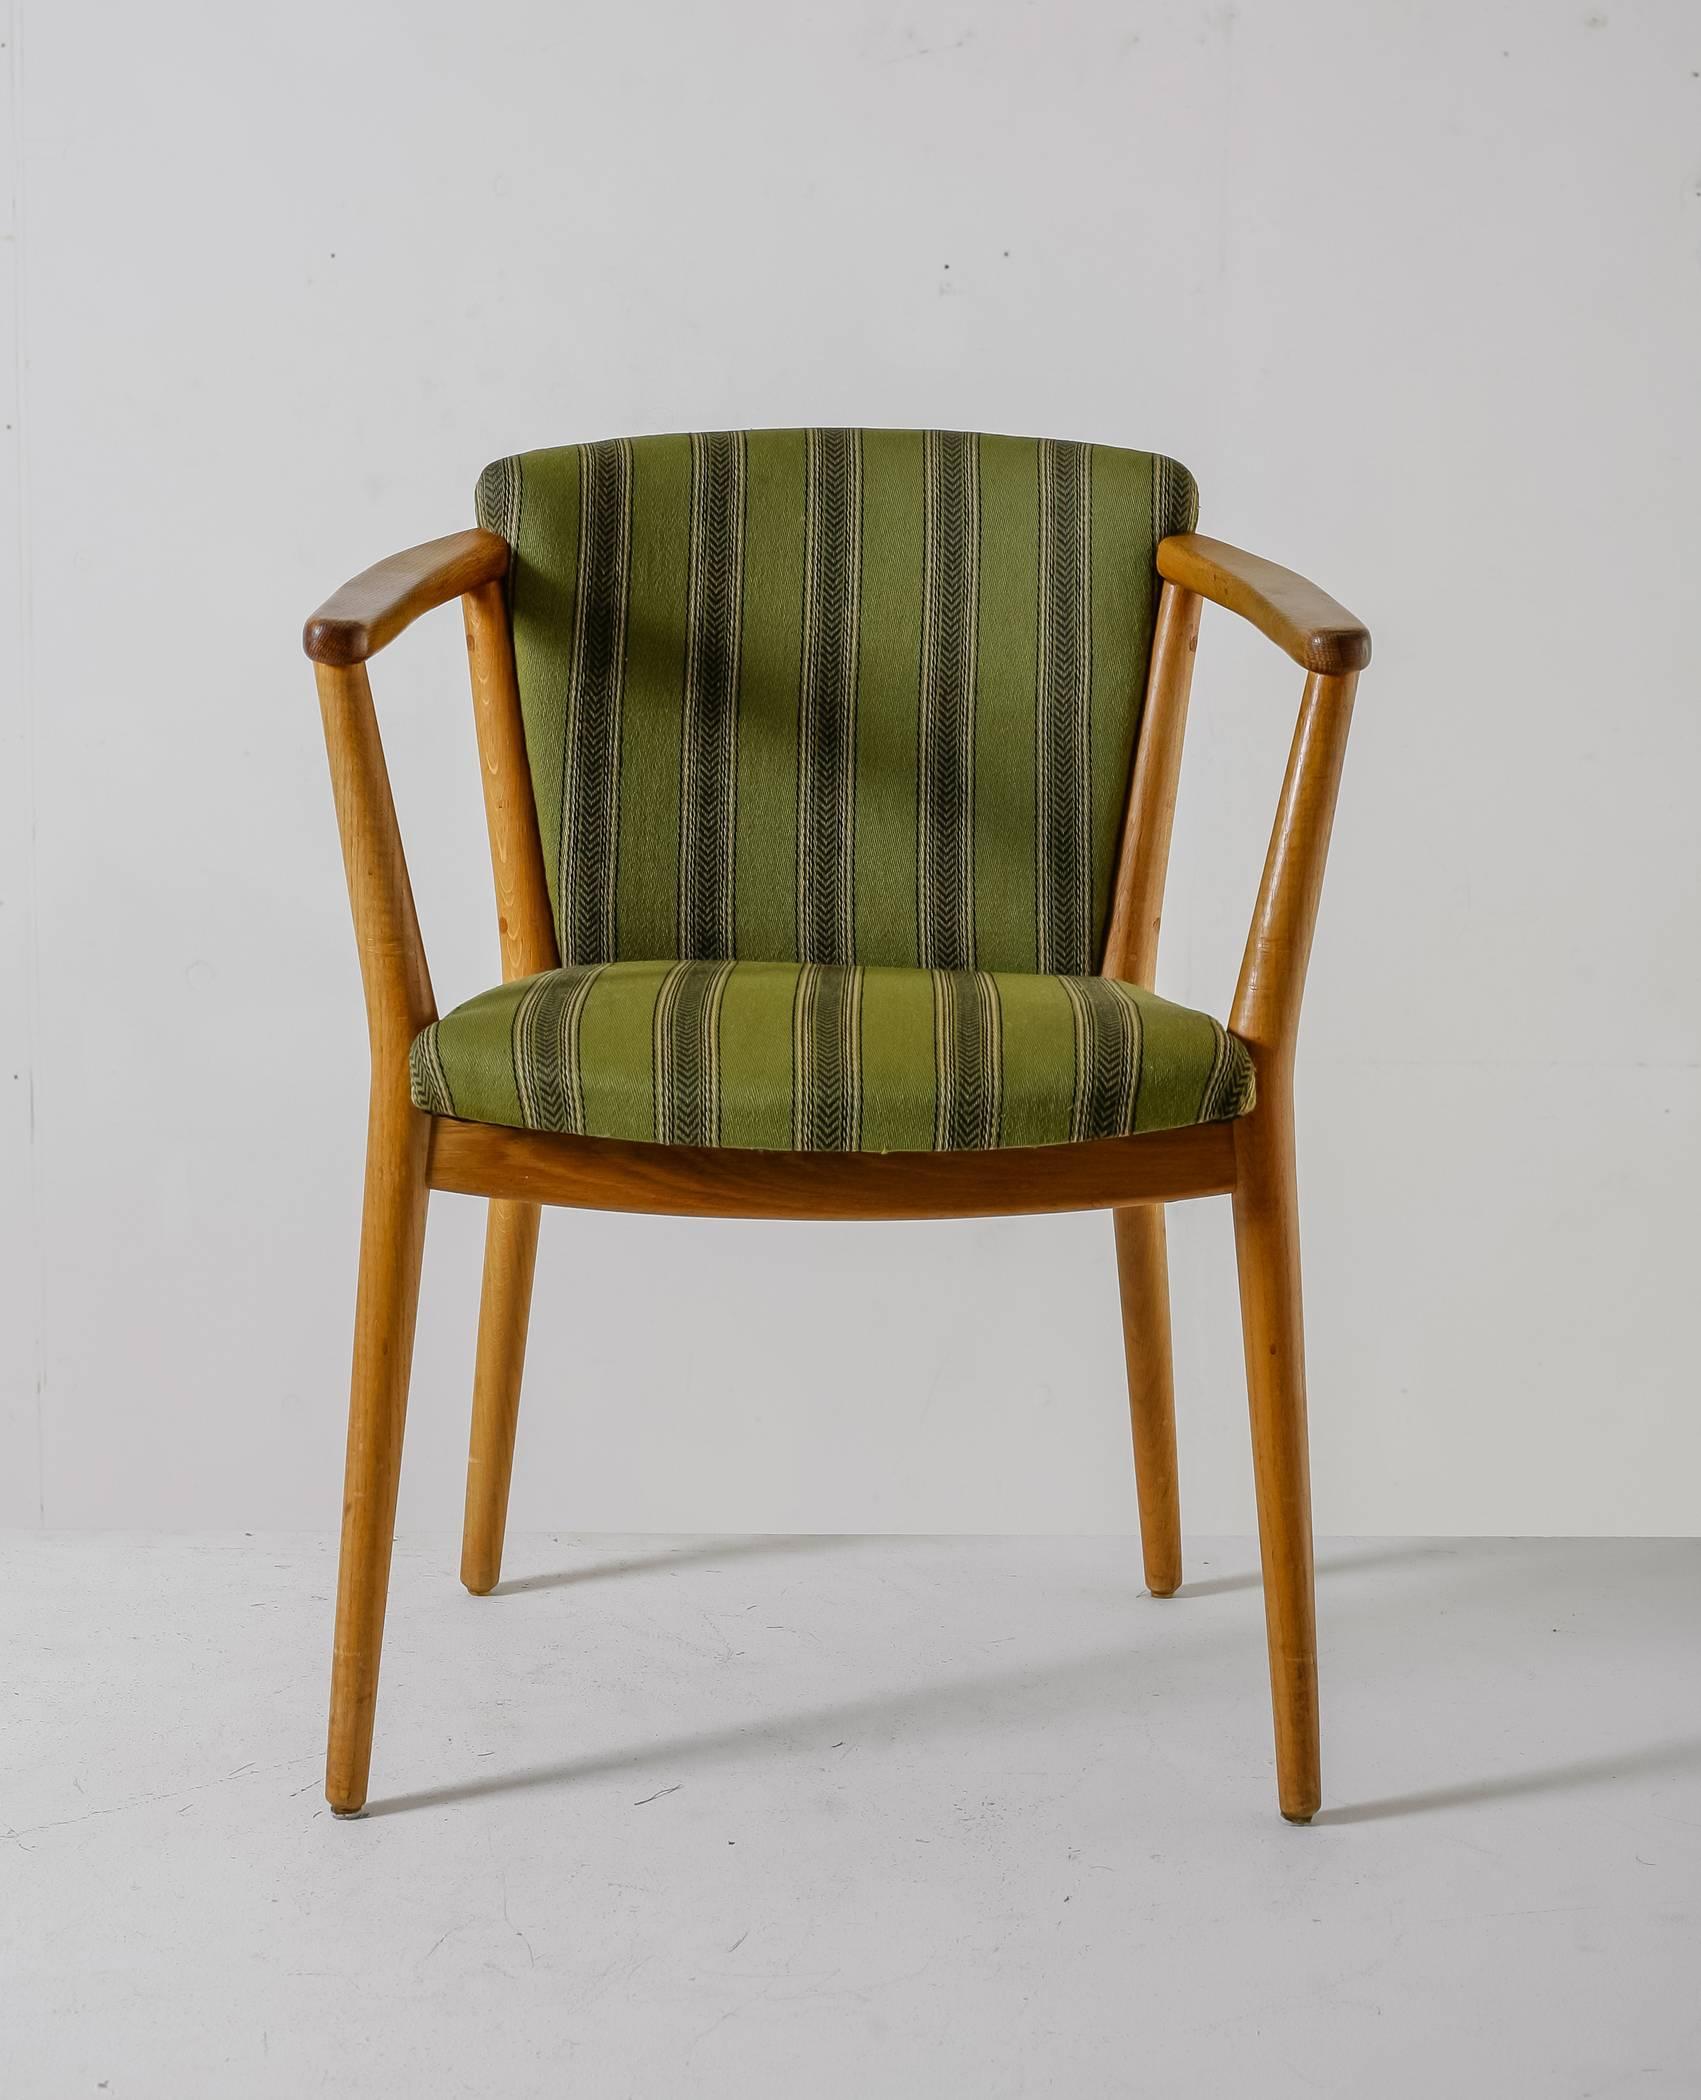 An oak armchair with a green striped fabric upholstgery, designed by Jørgen and Nanna Ditzel, manufactured by Søren Willadsen.
The chair was presented at the 'Tidens Møbler' exhibition in the stand of 'Magasin Du Nord' in Forum, Copenhagen, 1952.
